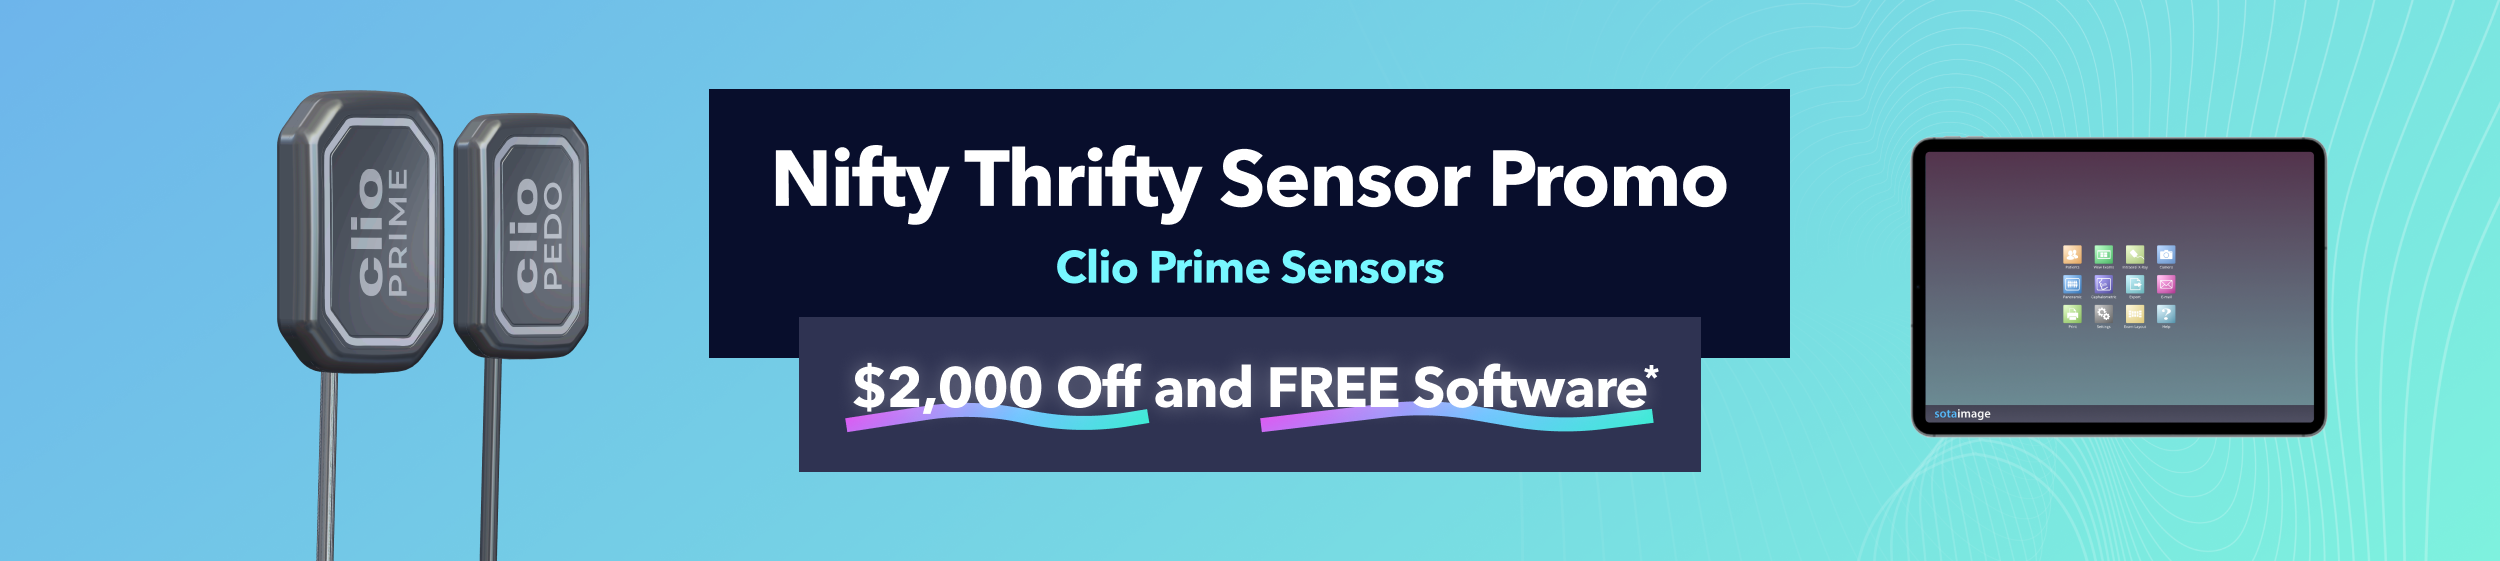 SOTA Imaging promos for Clio Prime digital x-ray sensors for Nifty Thrifty Dentists.